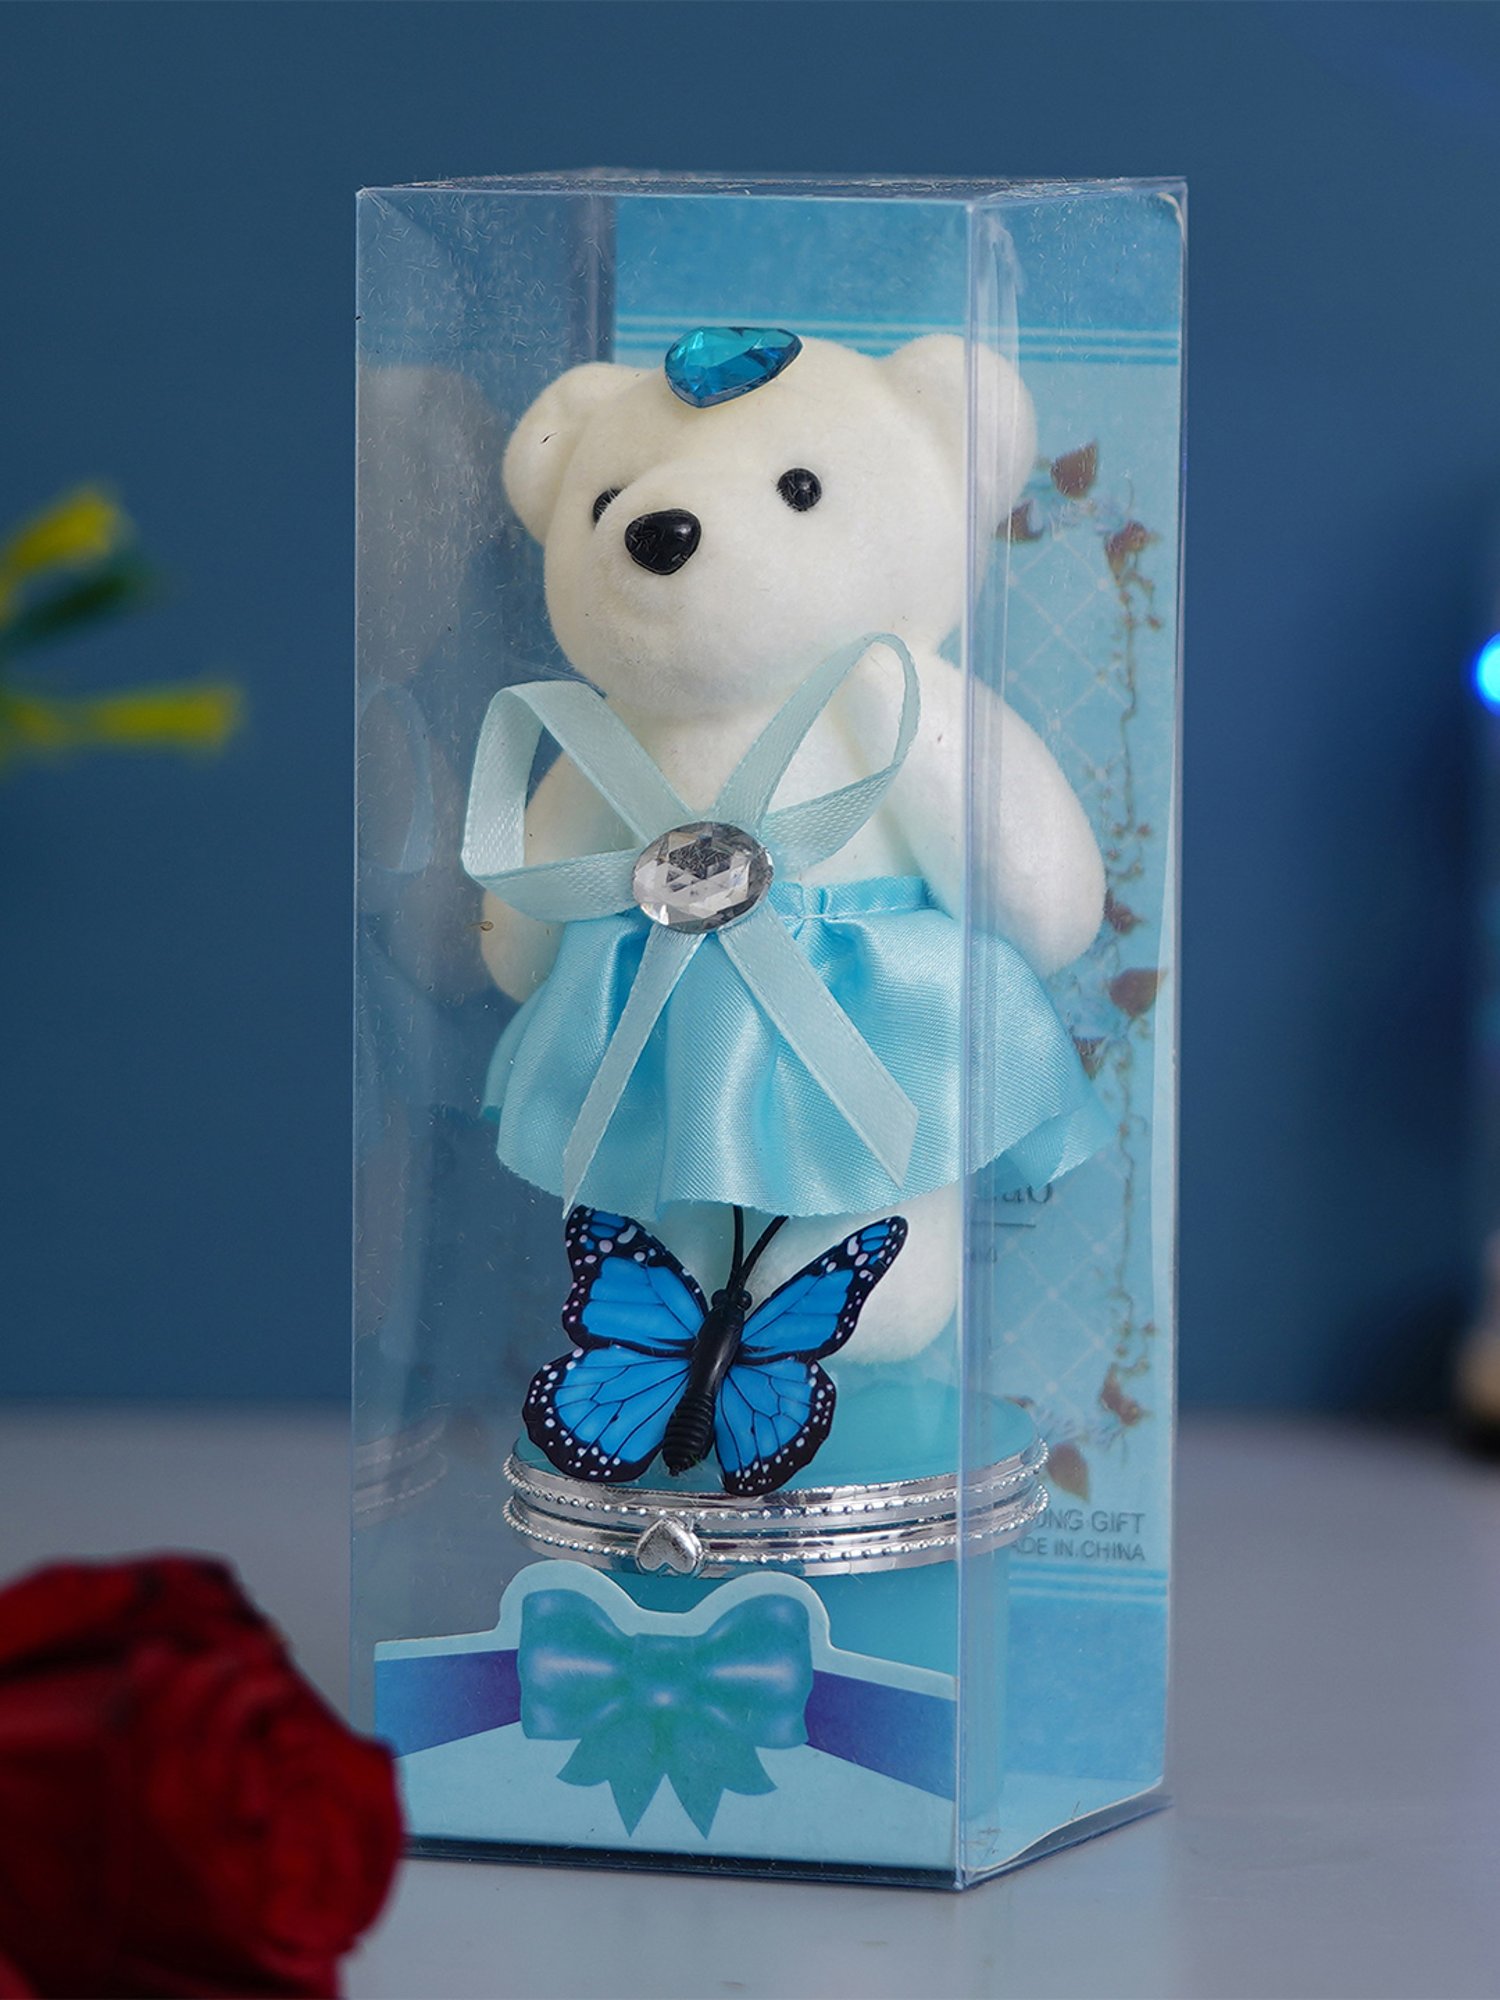 Amazon.com - FINE PHOTO GIFTS Teddy Bear with Picture Frame